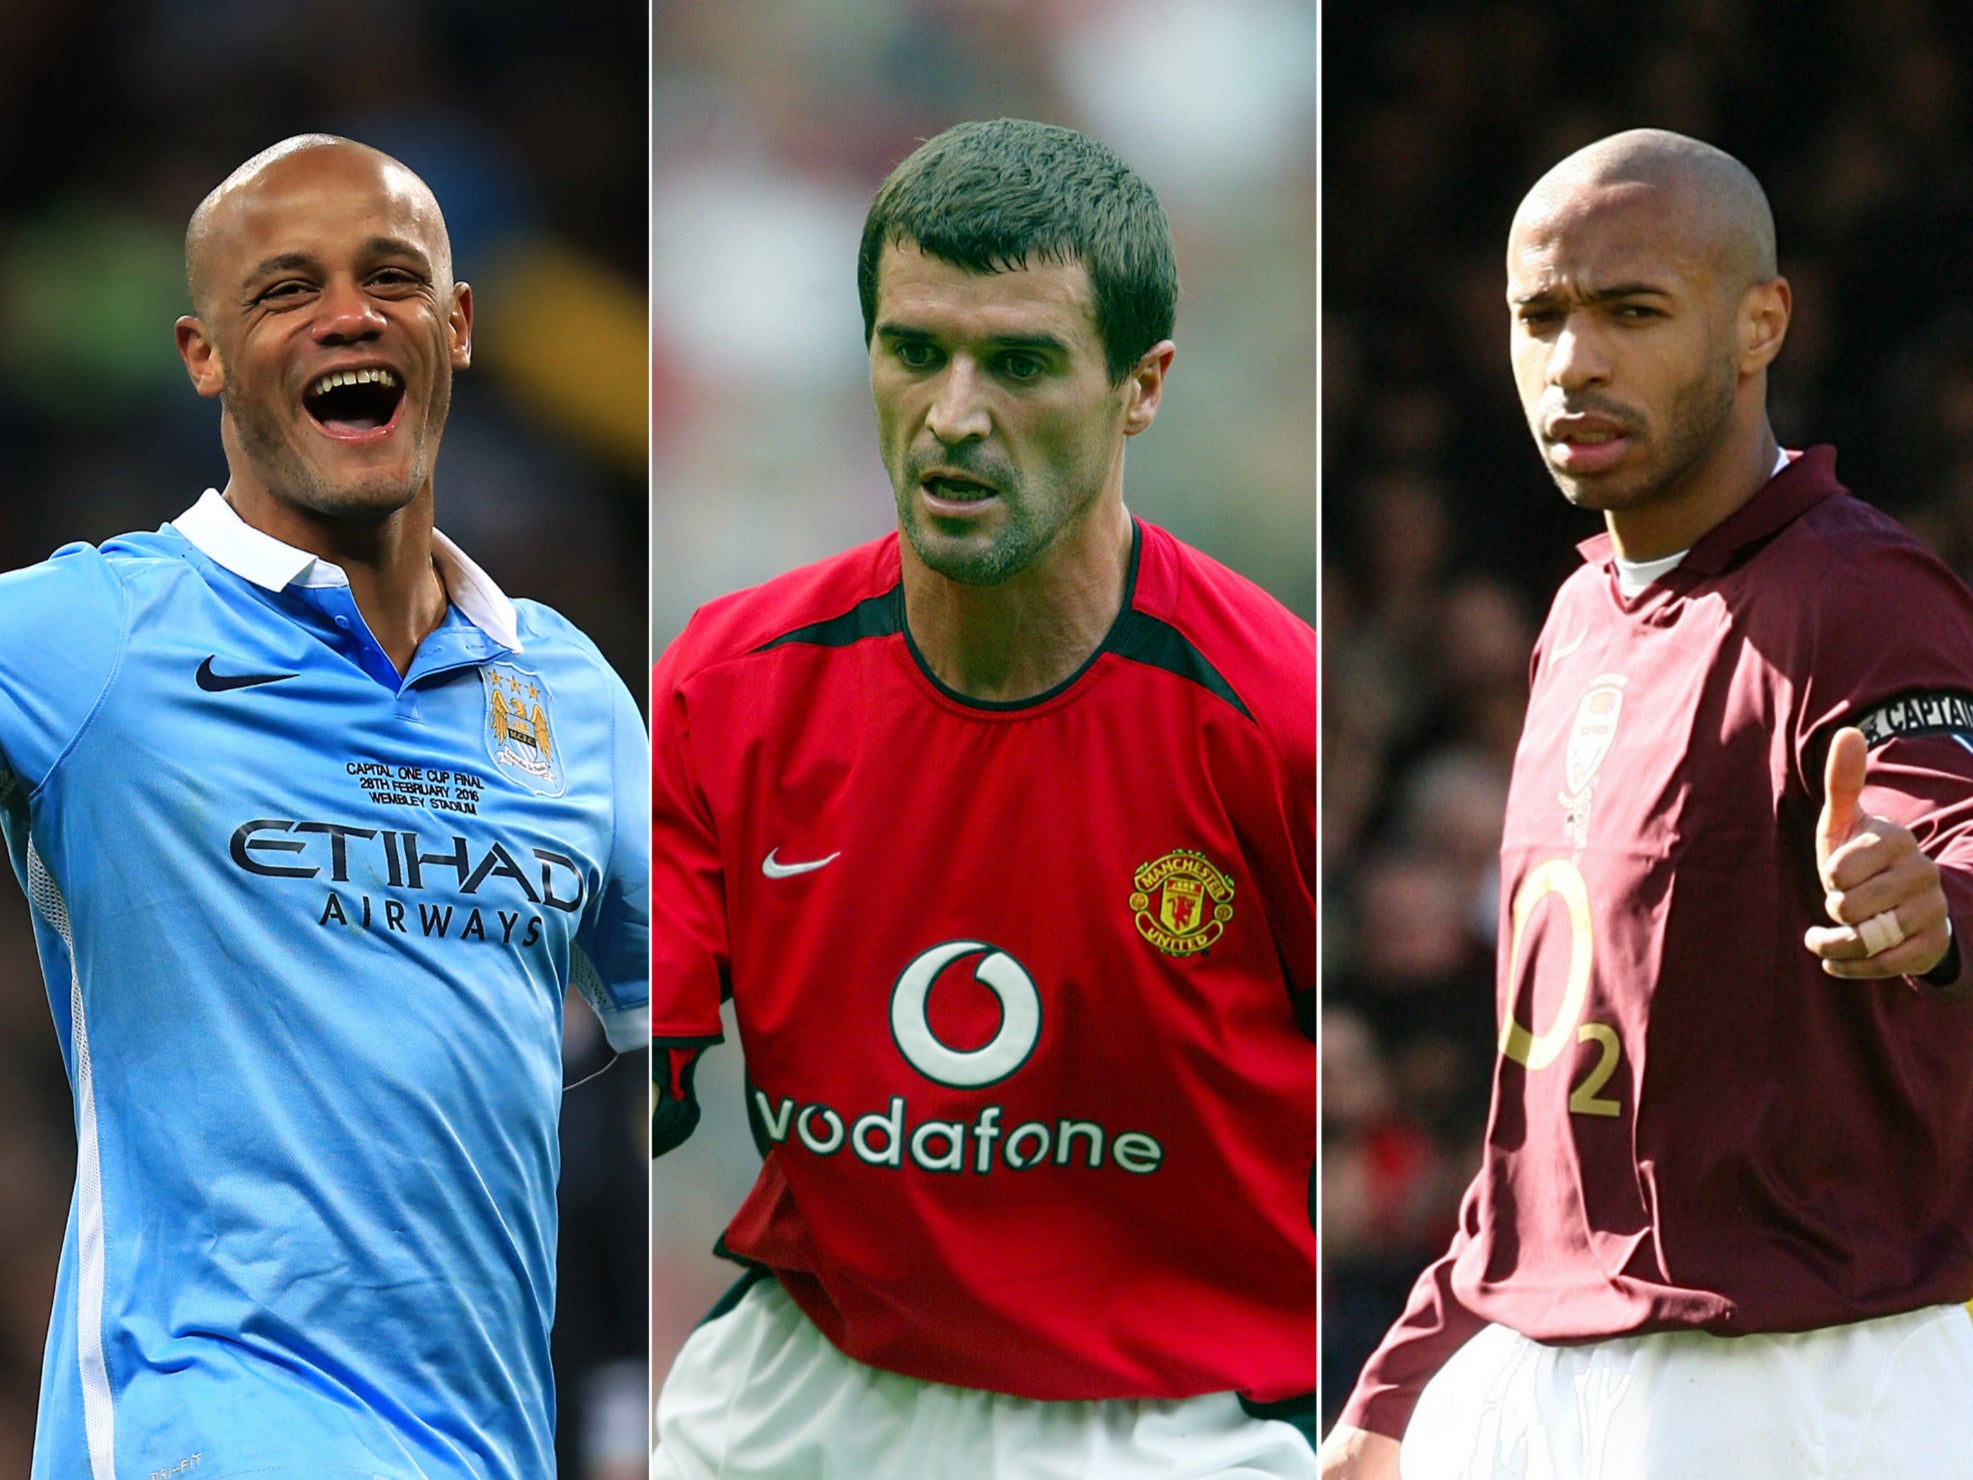 Vincent Kompany, Roy Keane and Thierry Henry